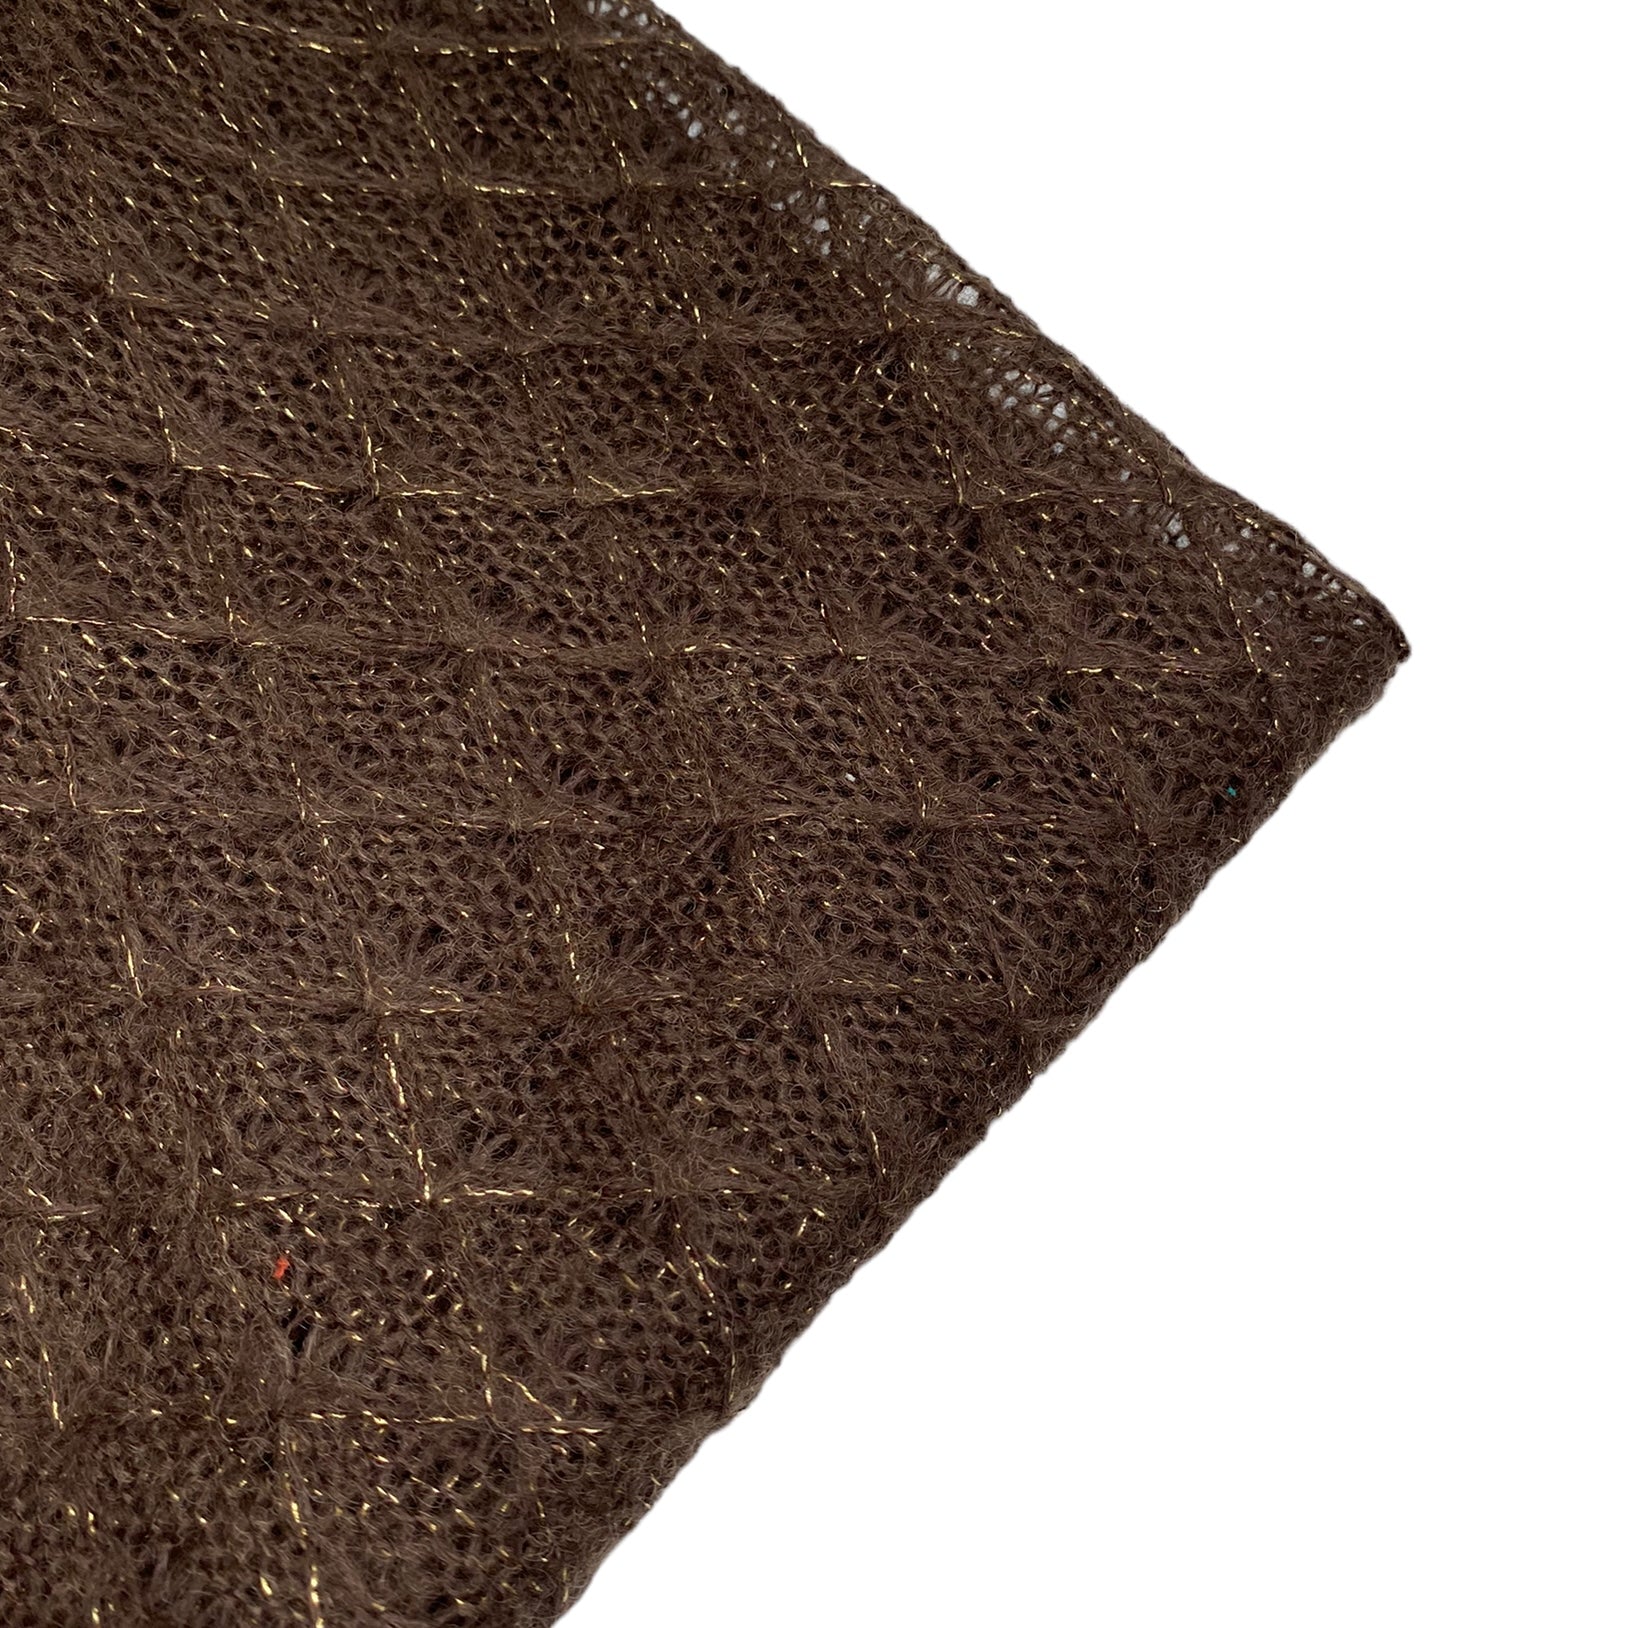 Wool Blend Open Weave Knit with Diamond Pattern - Brown/Gold